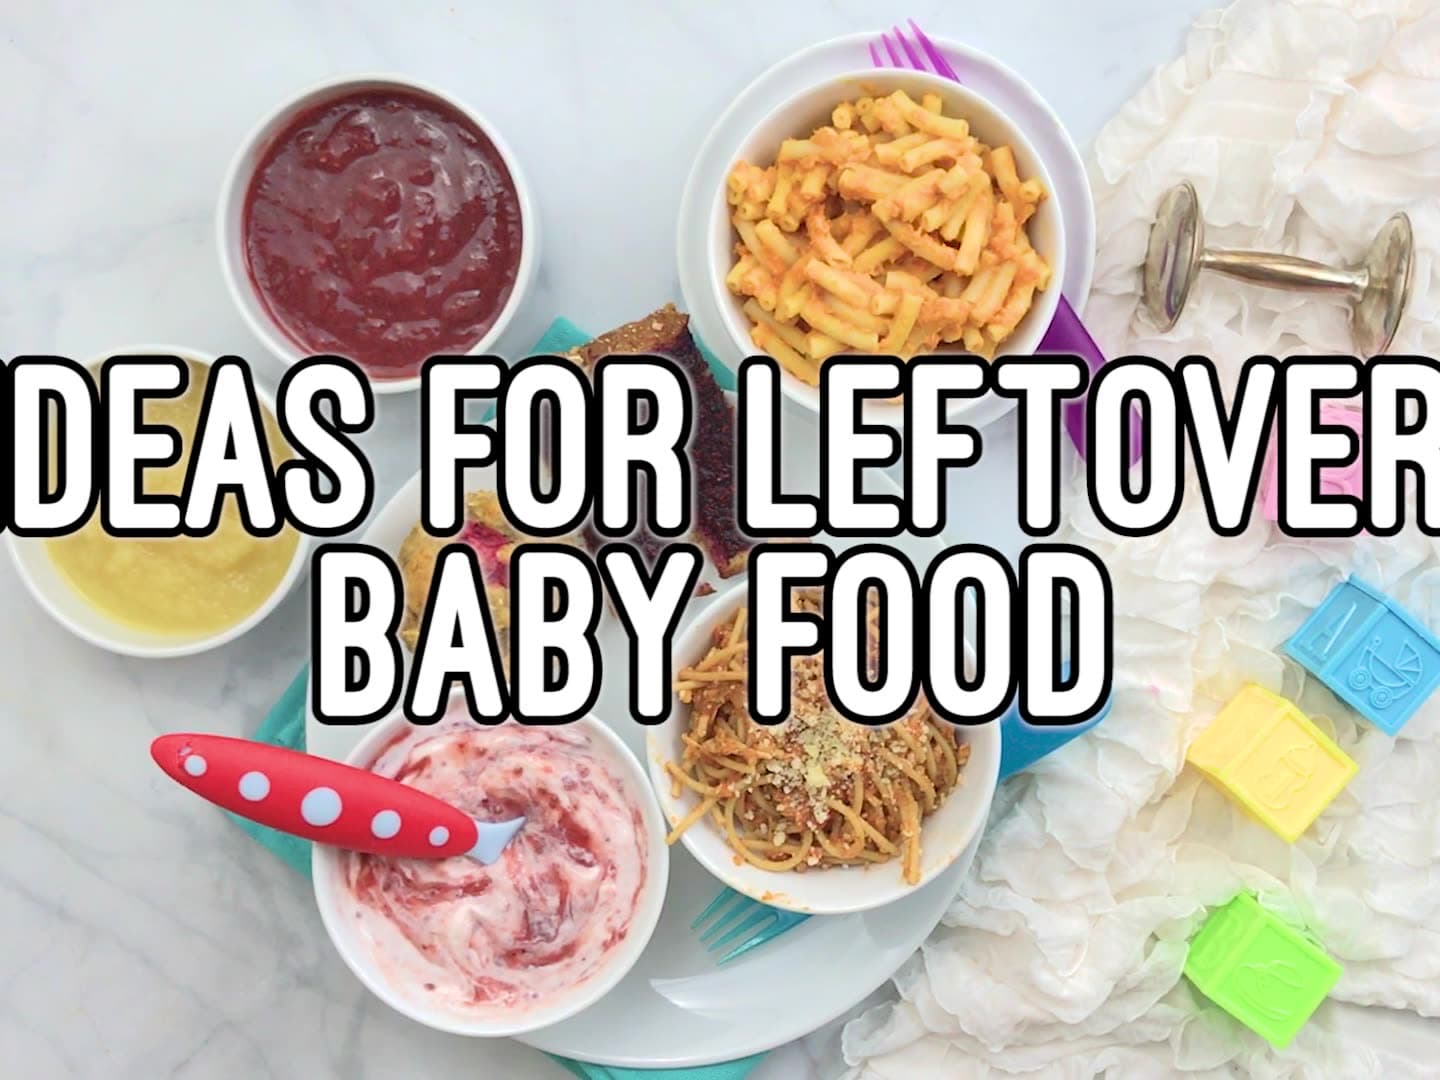 If You Just Threw Out All Your Baby Food, Here's How to Make Your Own